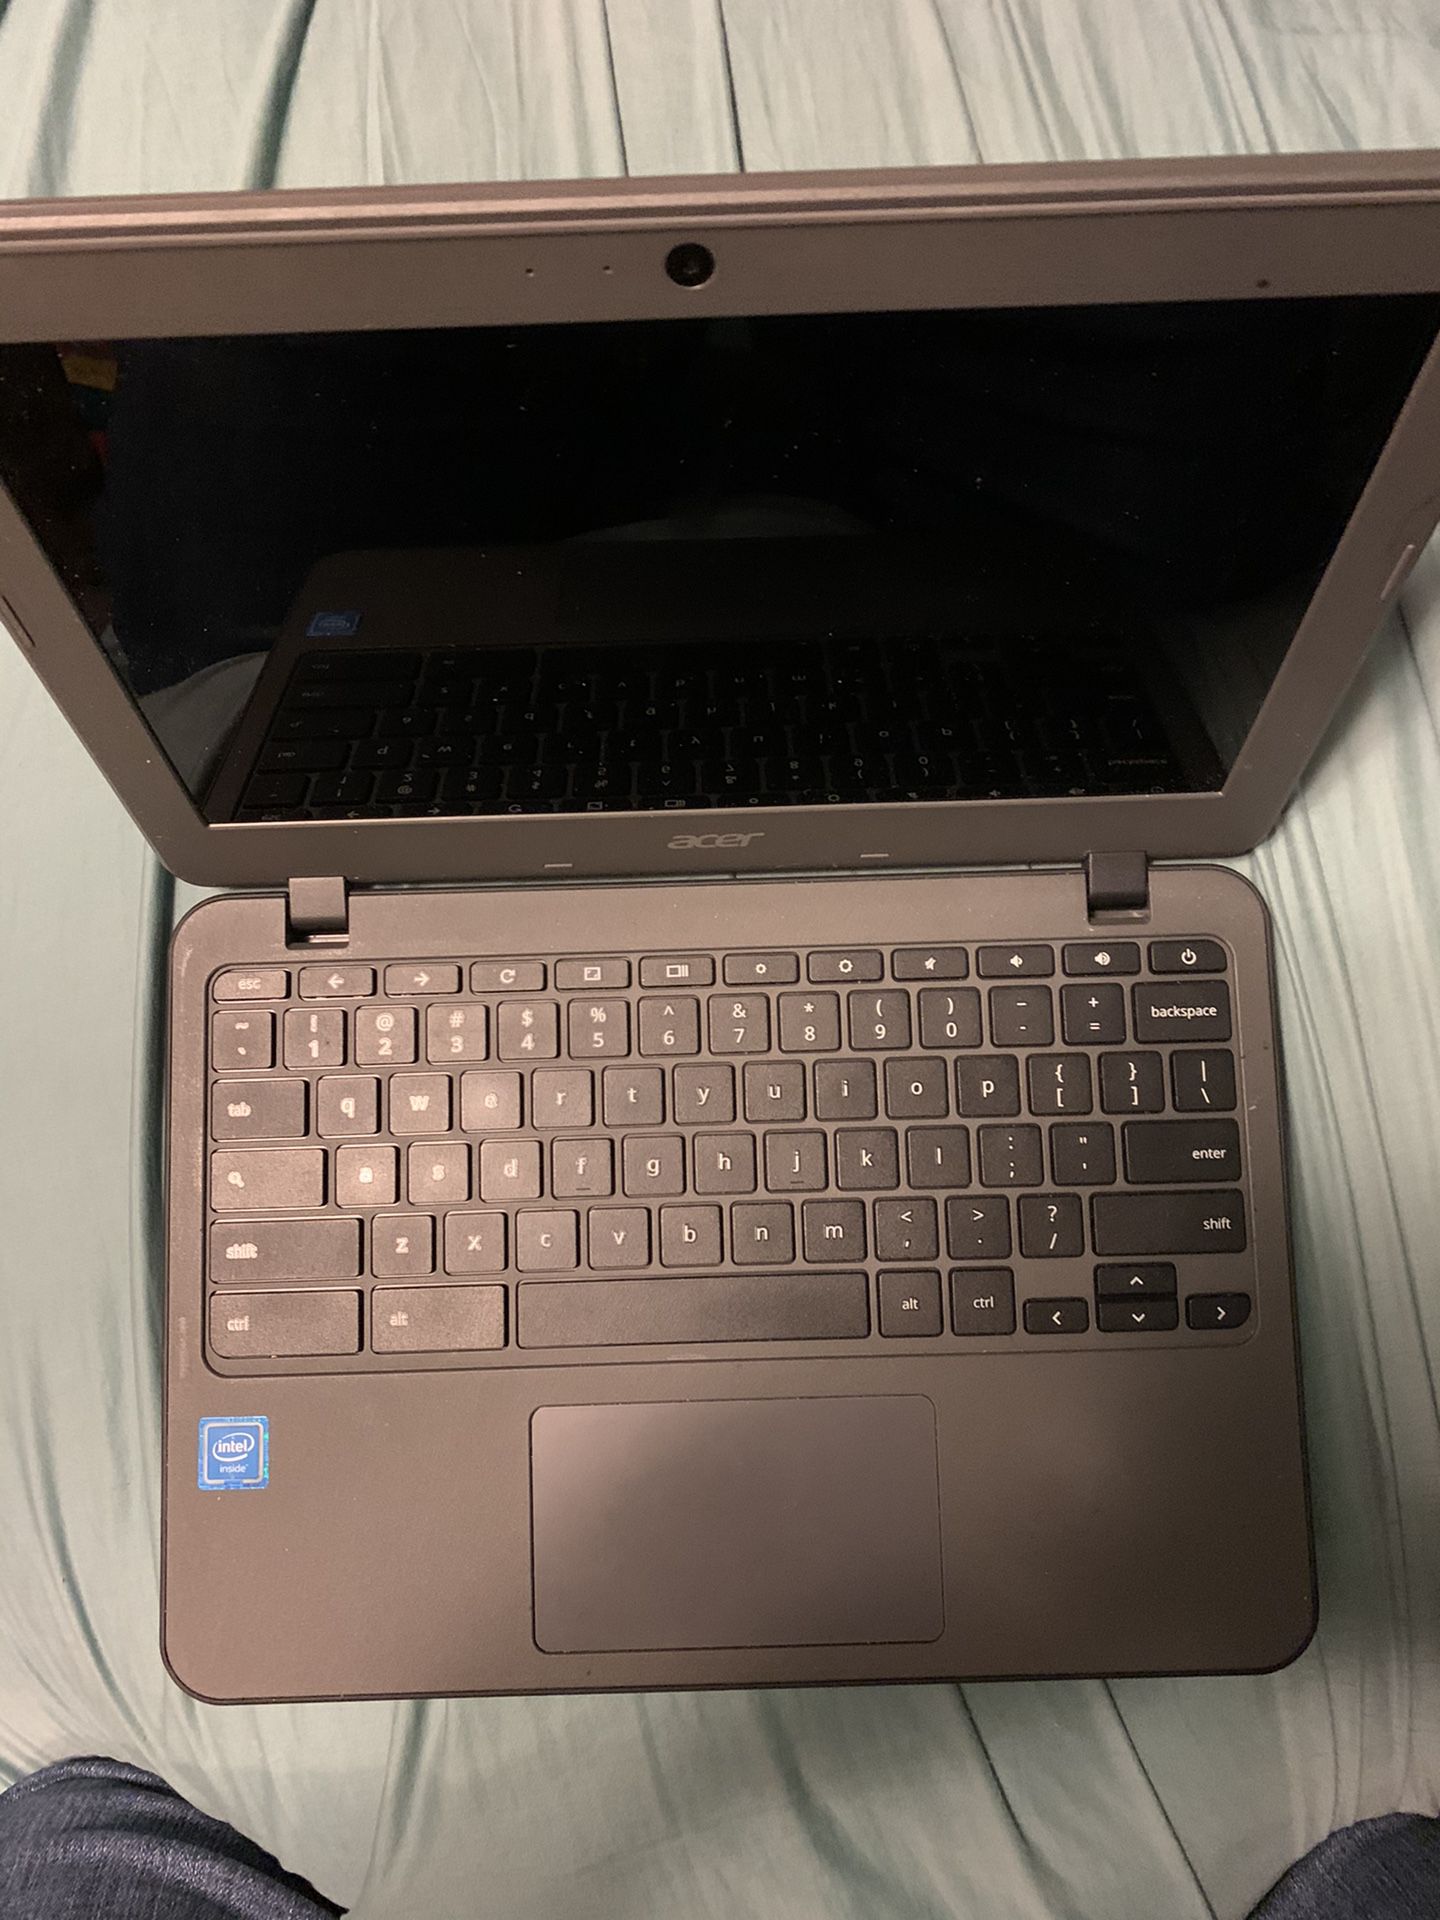 Chrome book with charger